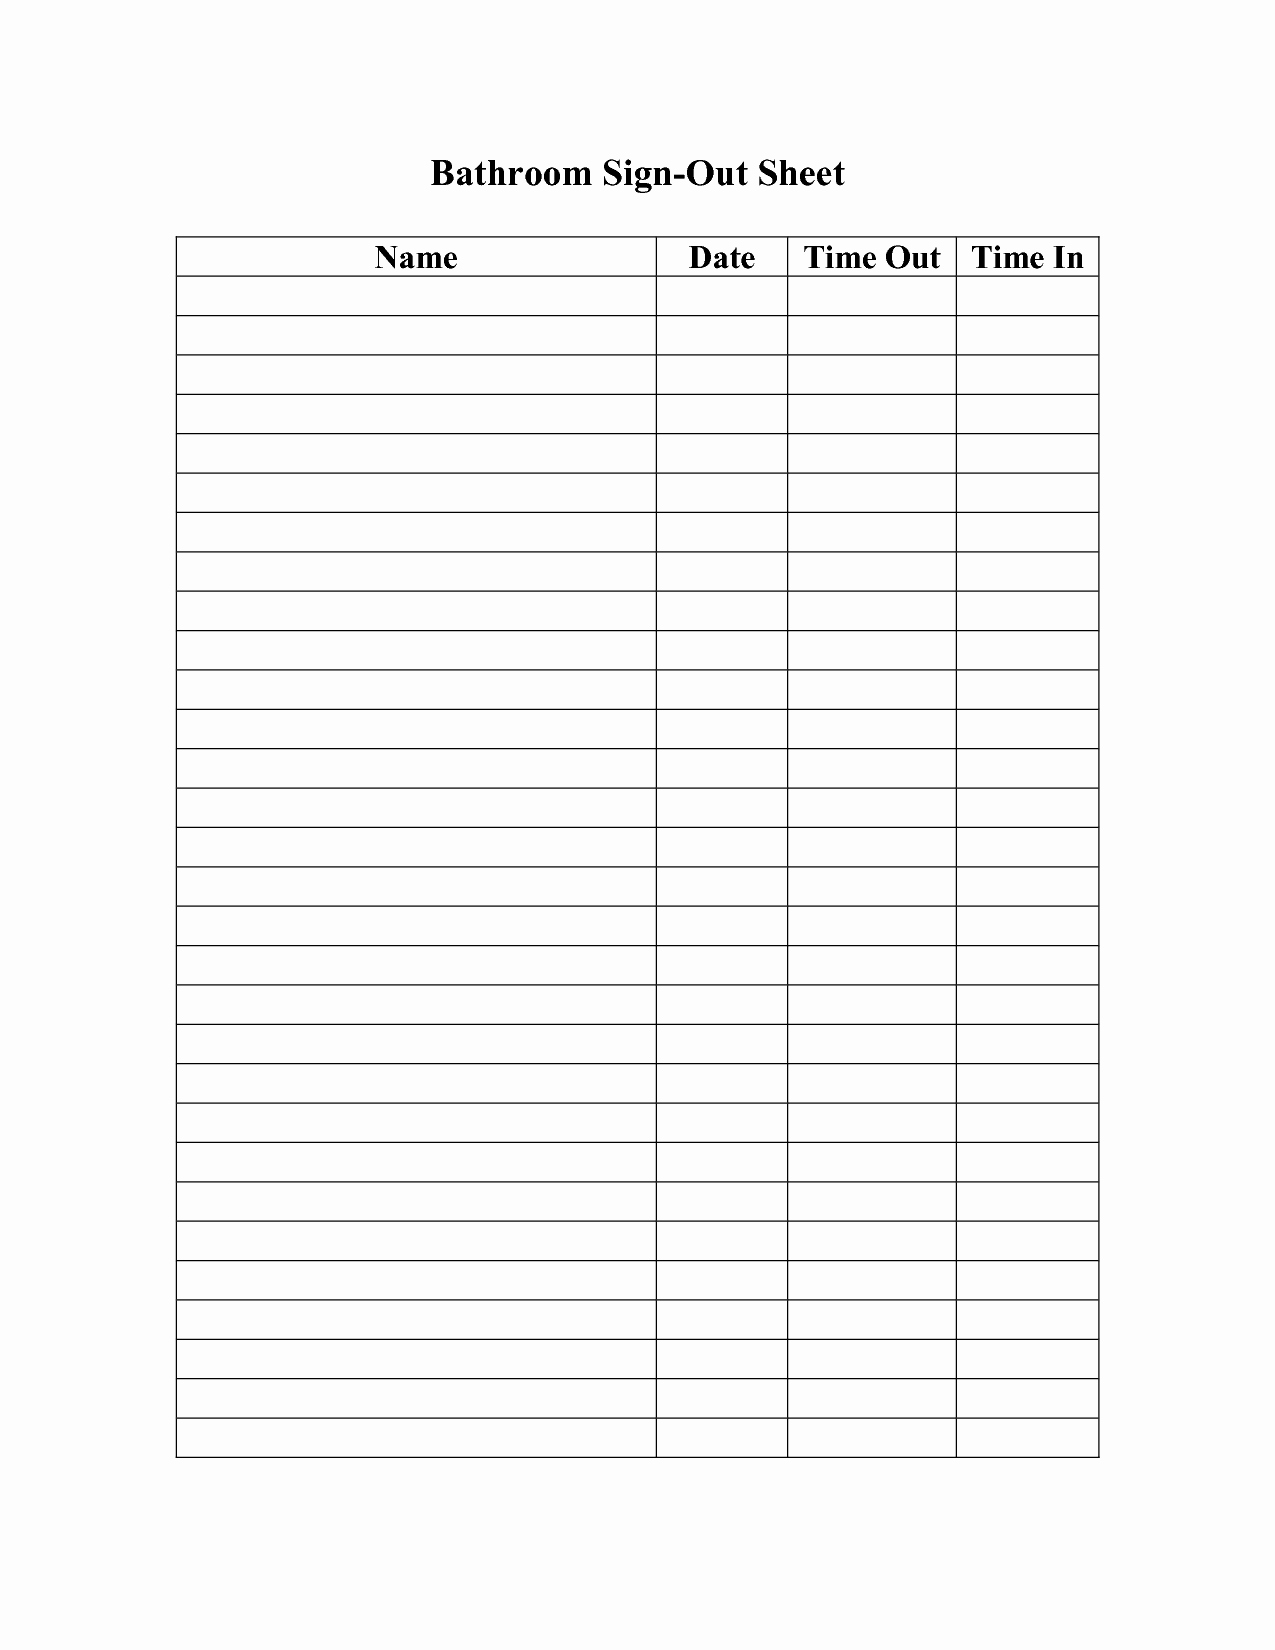 Sign In Out Sheet Template Best Of 6 Best Of Bathroom Sign Out Sheet Printable